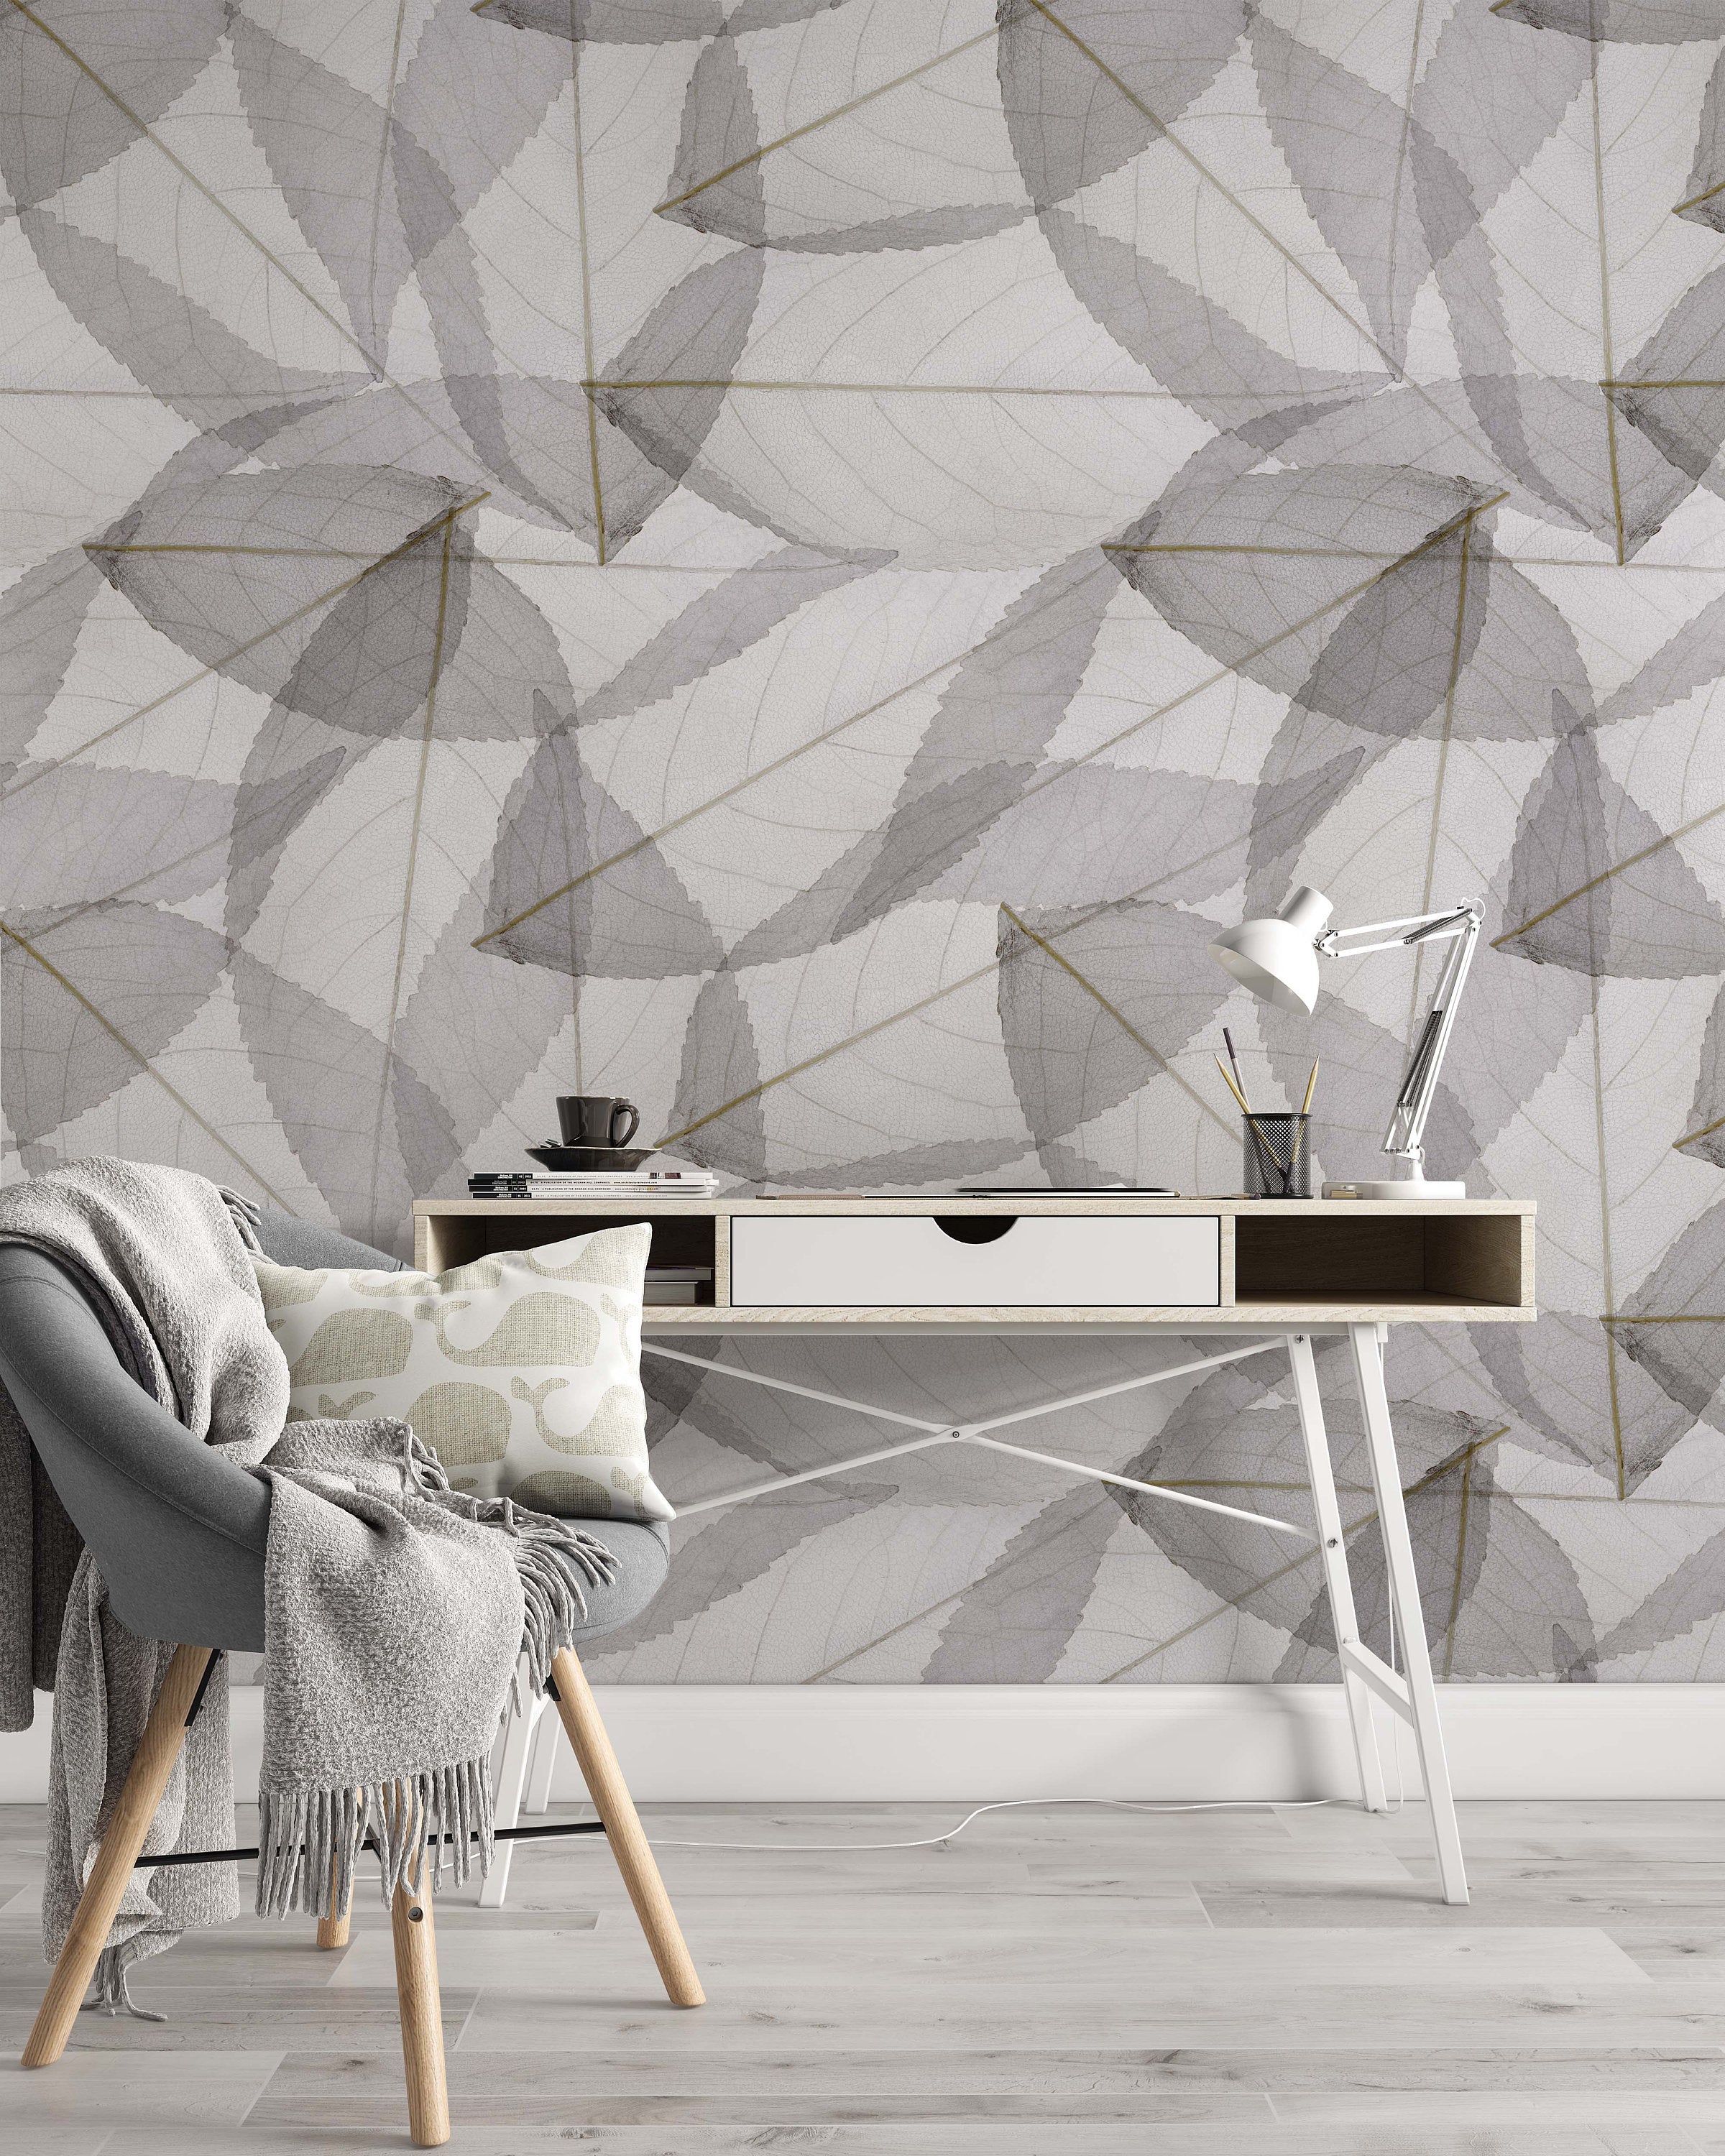 Abstract Gray Leaves Modern Floral Background Wallpaper Cafe Restaurant Decoration Living Room Bedroom Mural Home Decor Wall Art